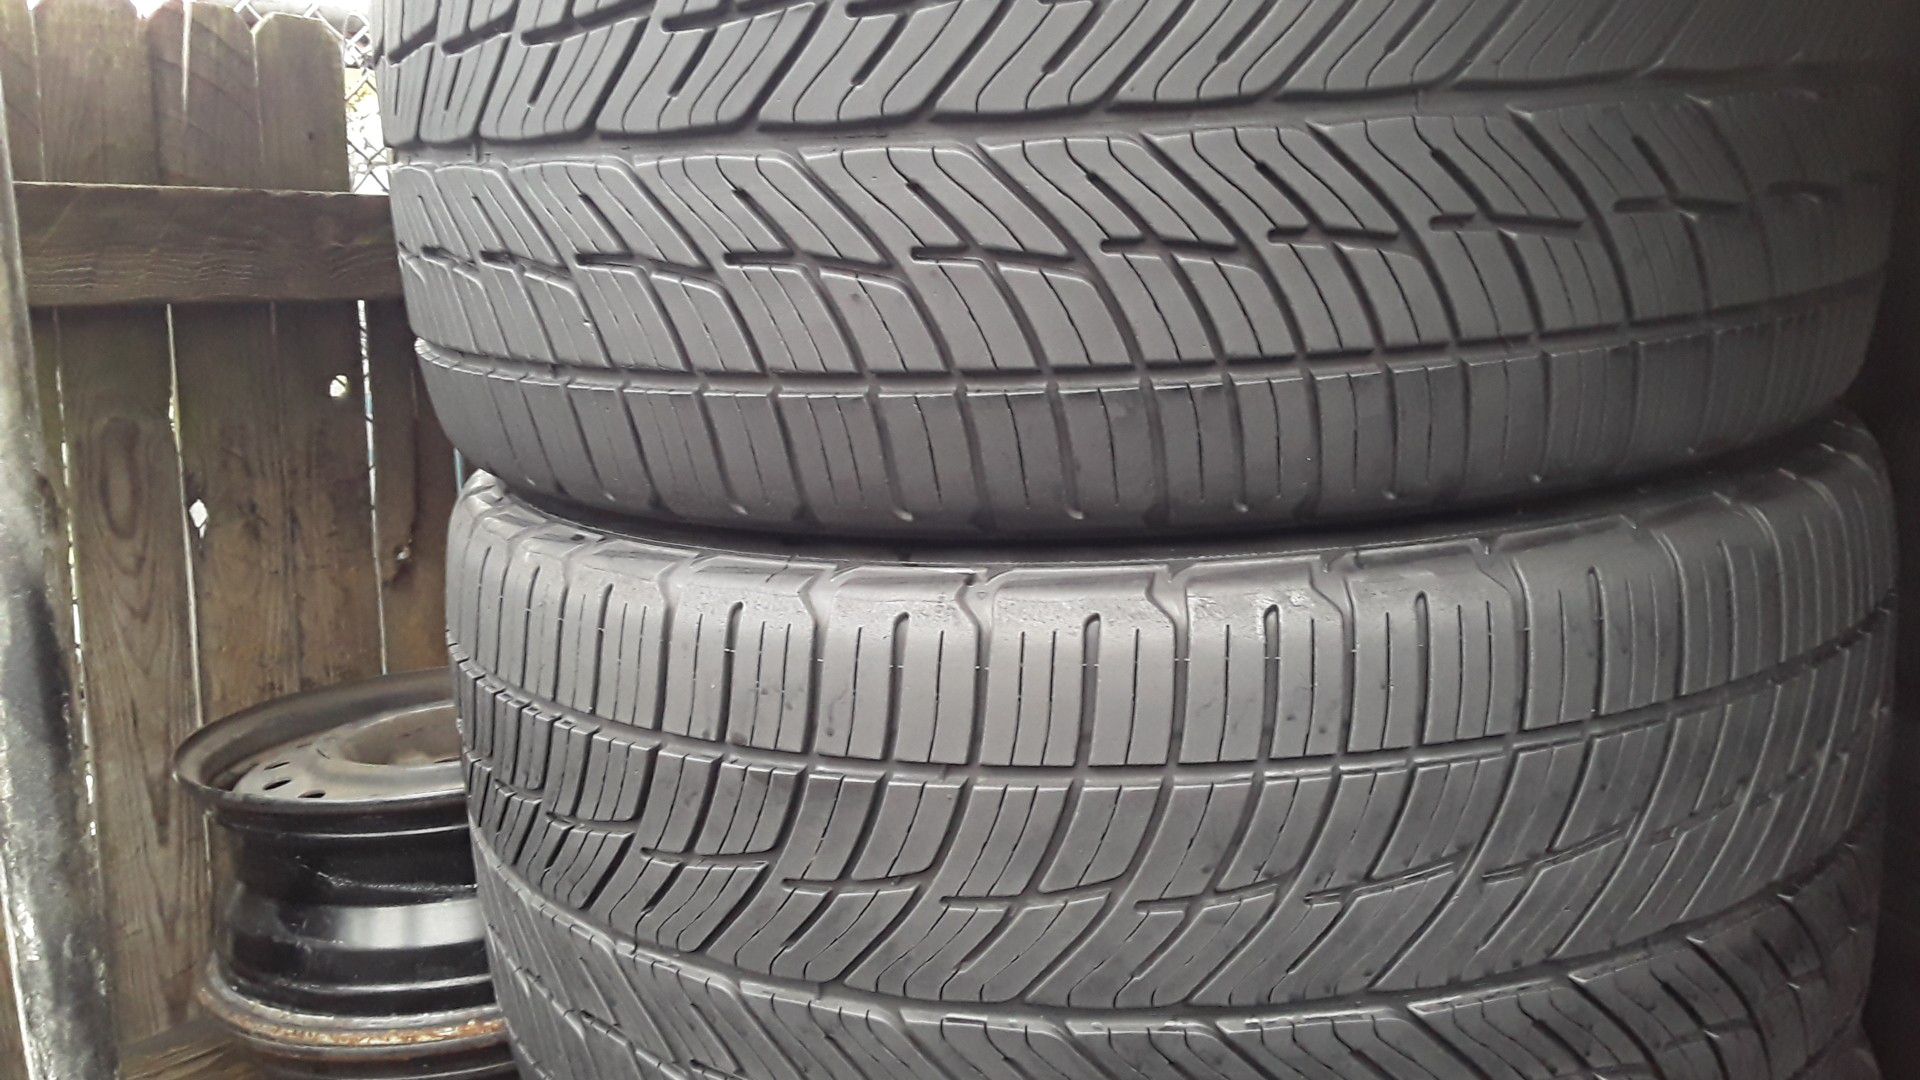 Two good set of bfgoodrich tires for {link removed}/20